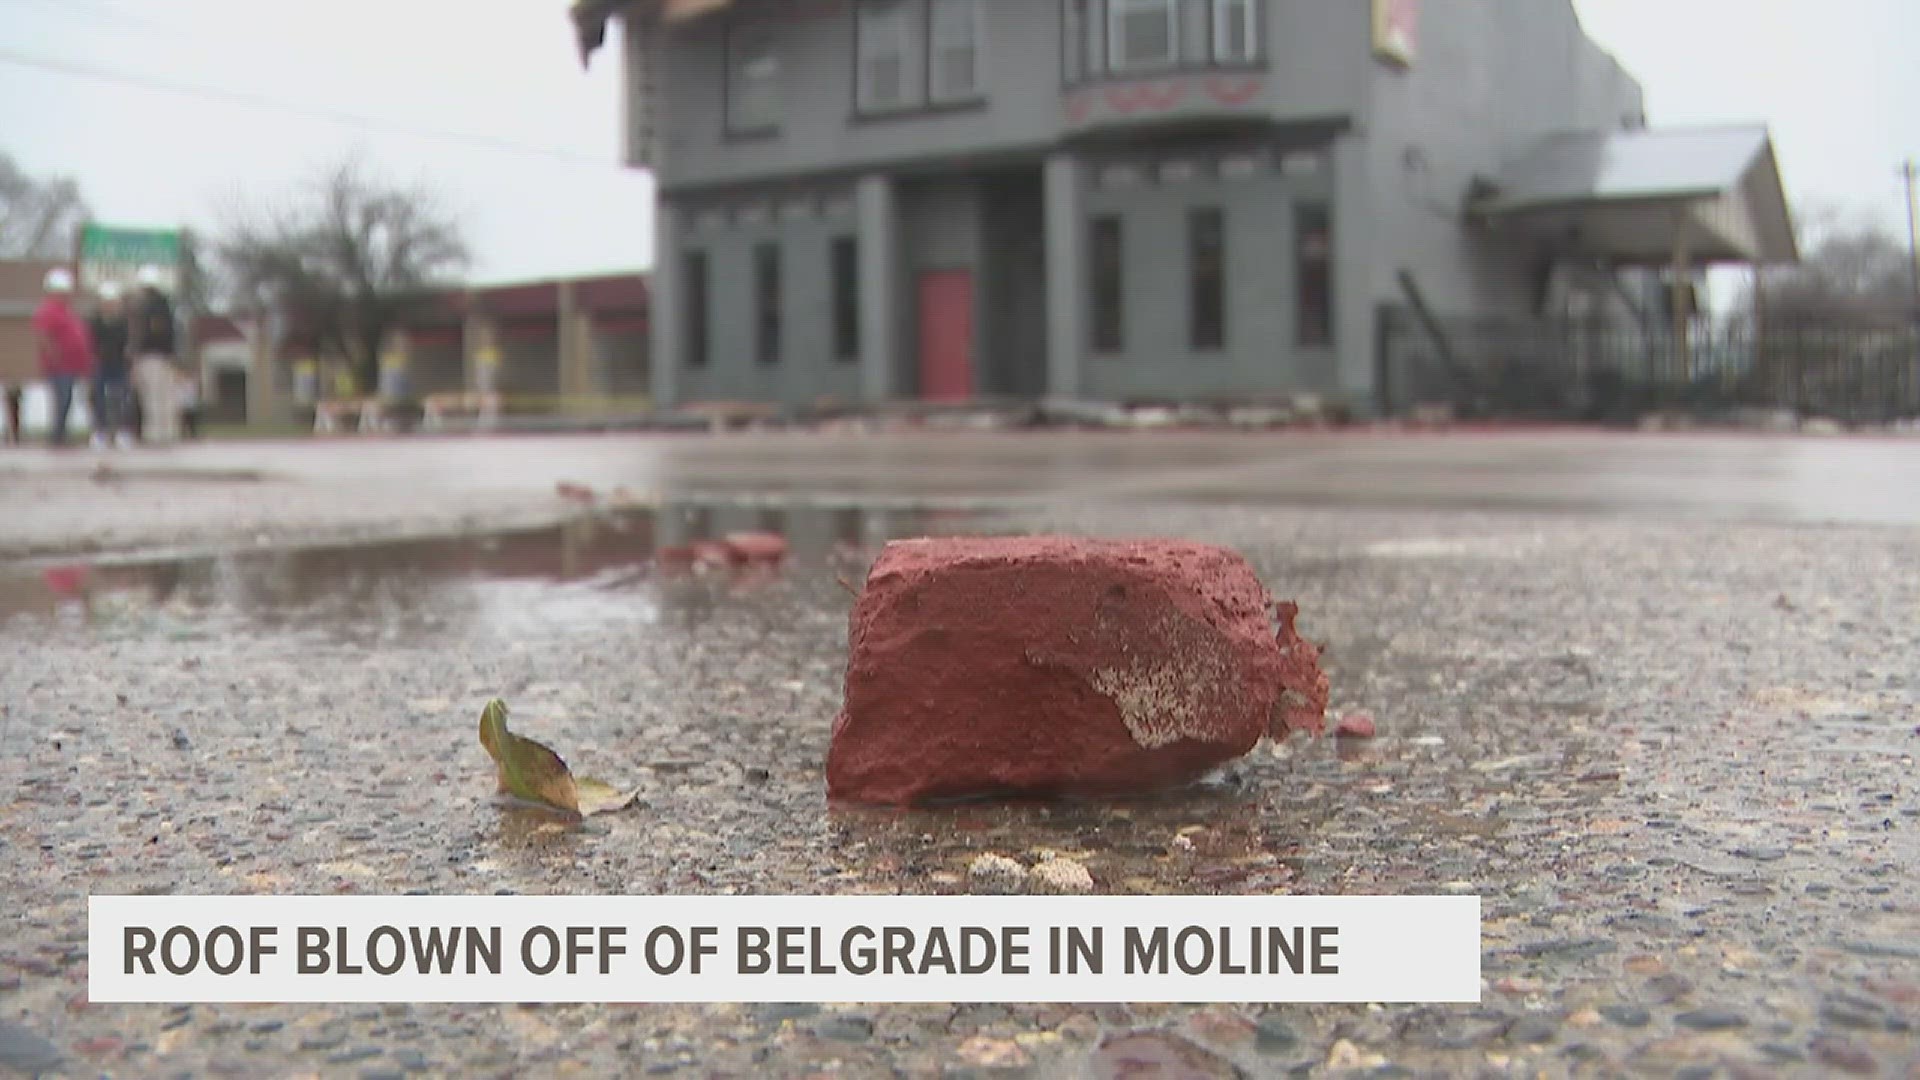 The Moline bar's roof was peeled off by extreme winds, with bricks thrown across the street.